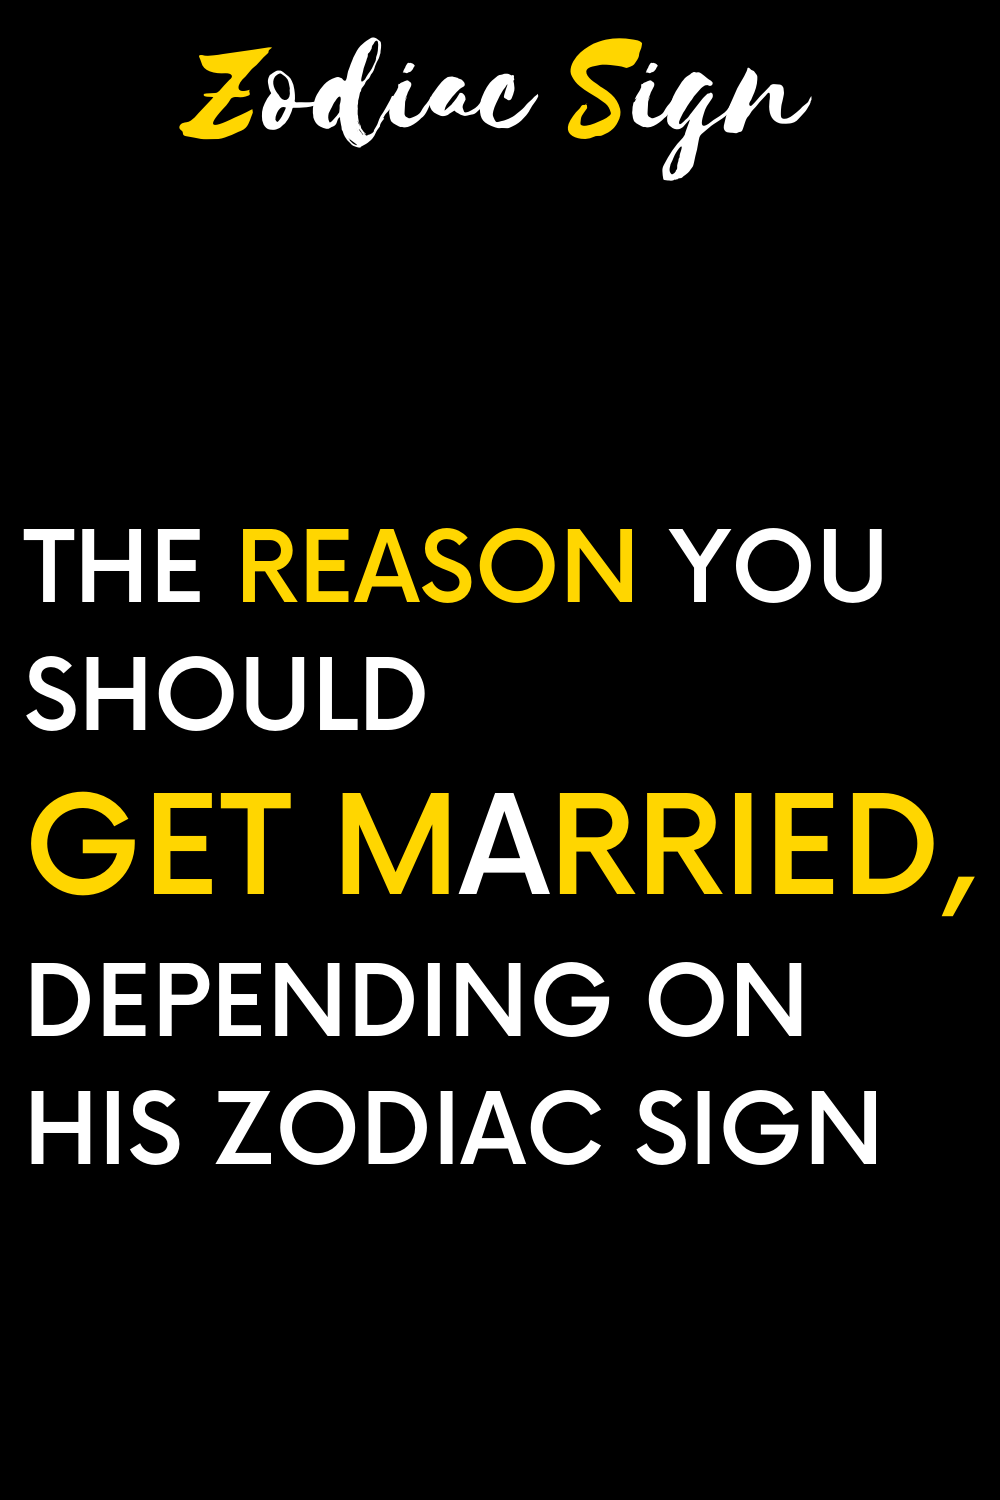 The reason you should get married, depending on his zodiac sign